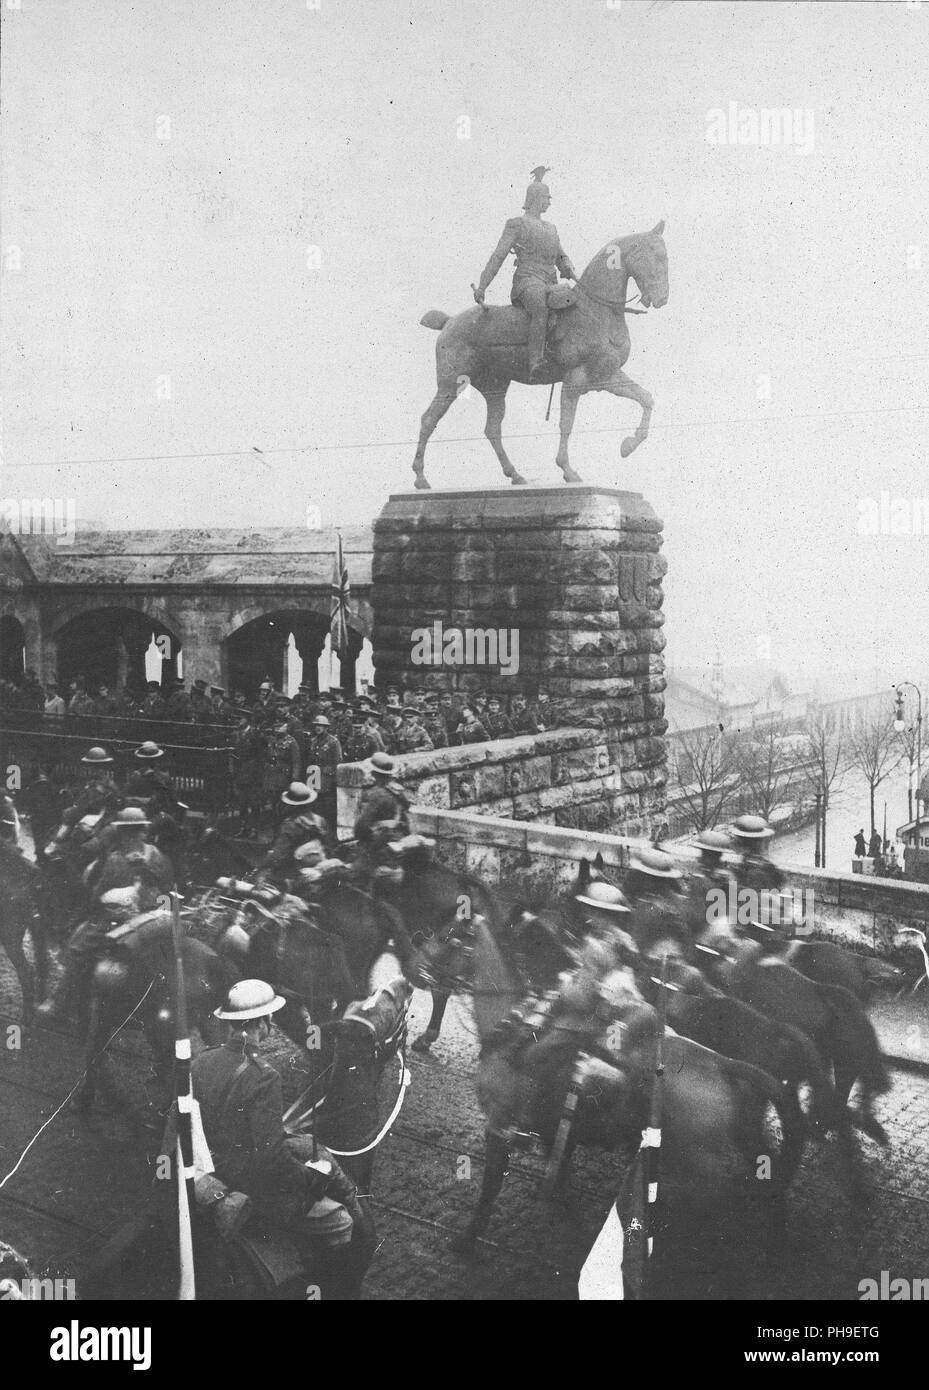 1919 - Kaiser watches British Army pass into Cologne. General Plumer, commander of the 2nd British Army with staff alongside the statue of the Kaiser, reviewing his cavalry as they cross the Hohenzollern Bridge at Cologne Stock Photo